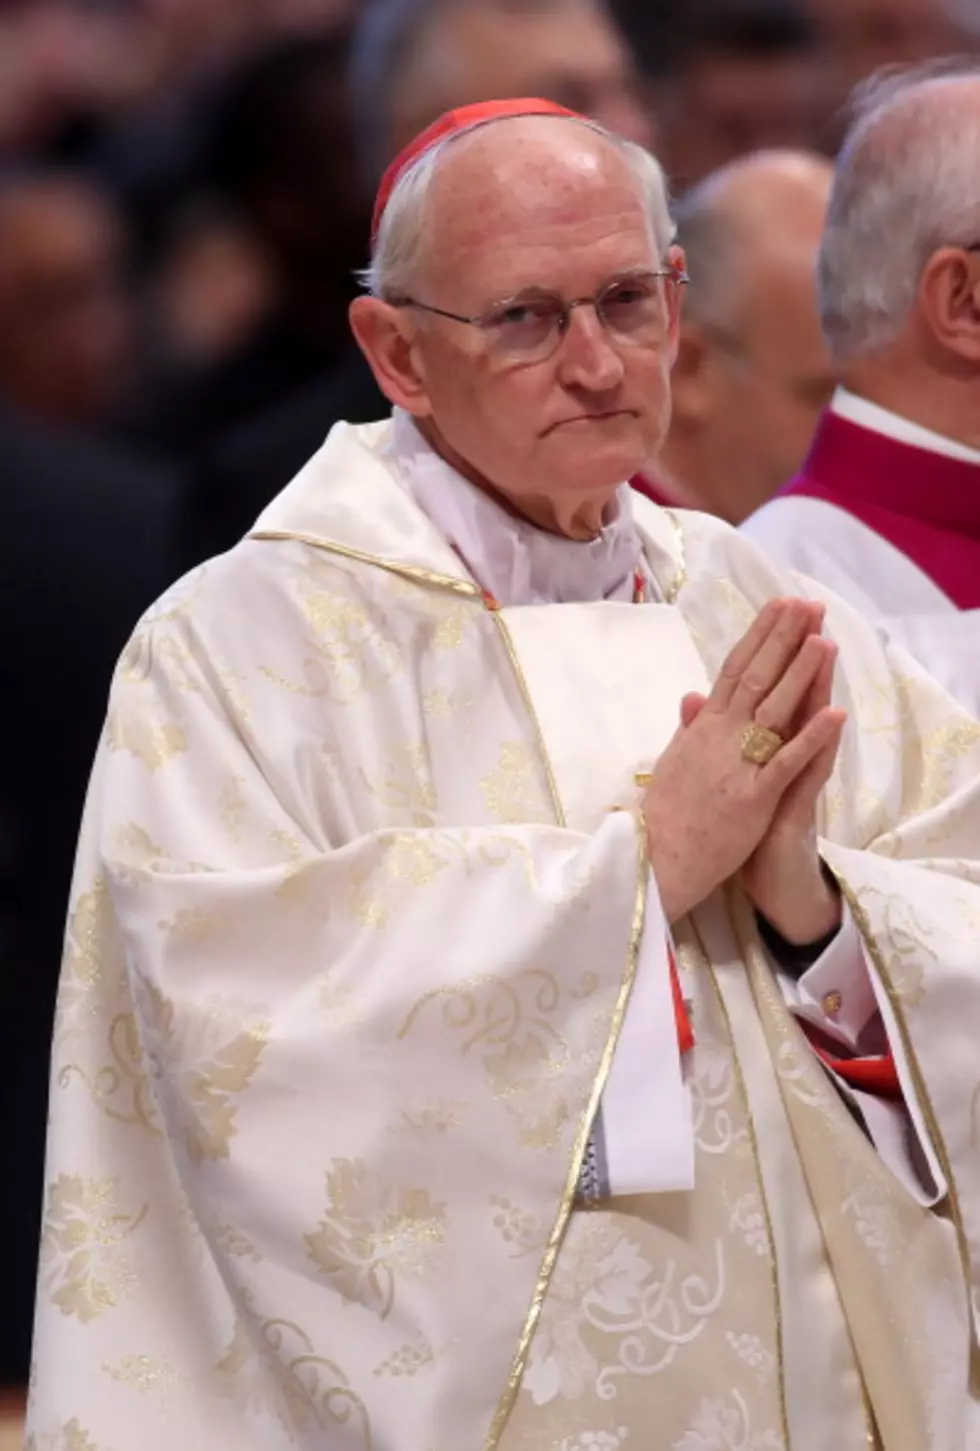 The Pope Is On Twitter &#8212; Yes, The Pope!